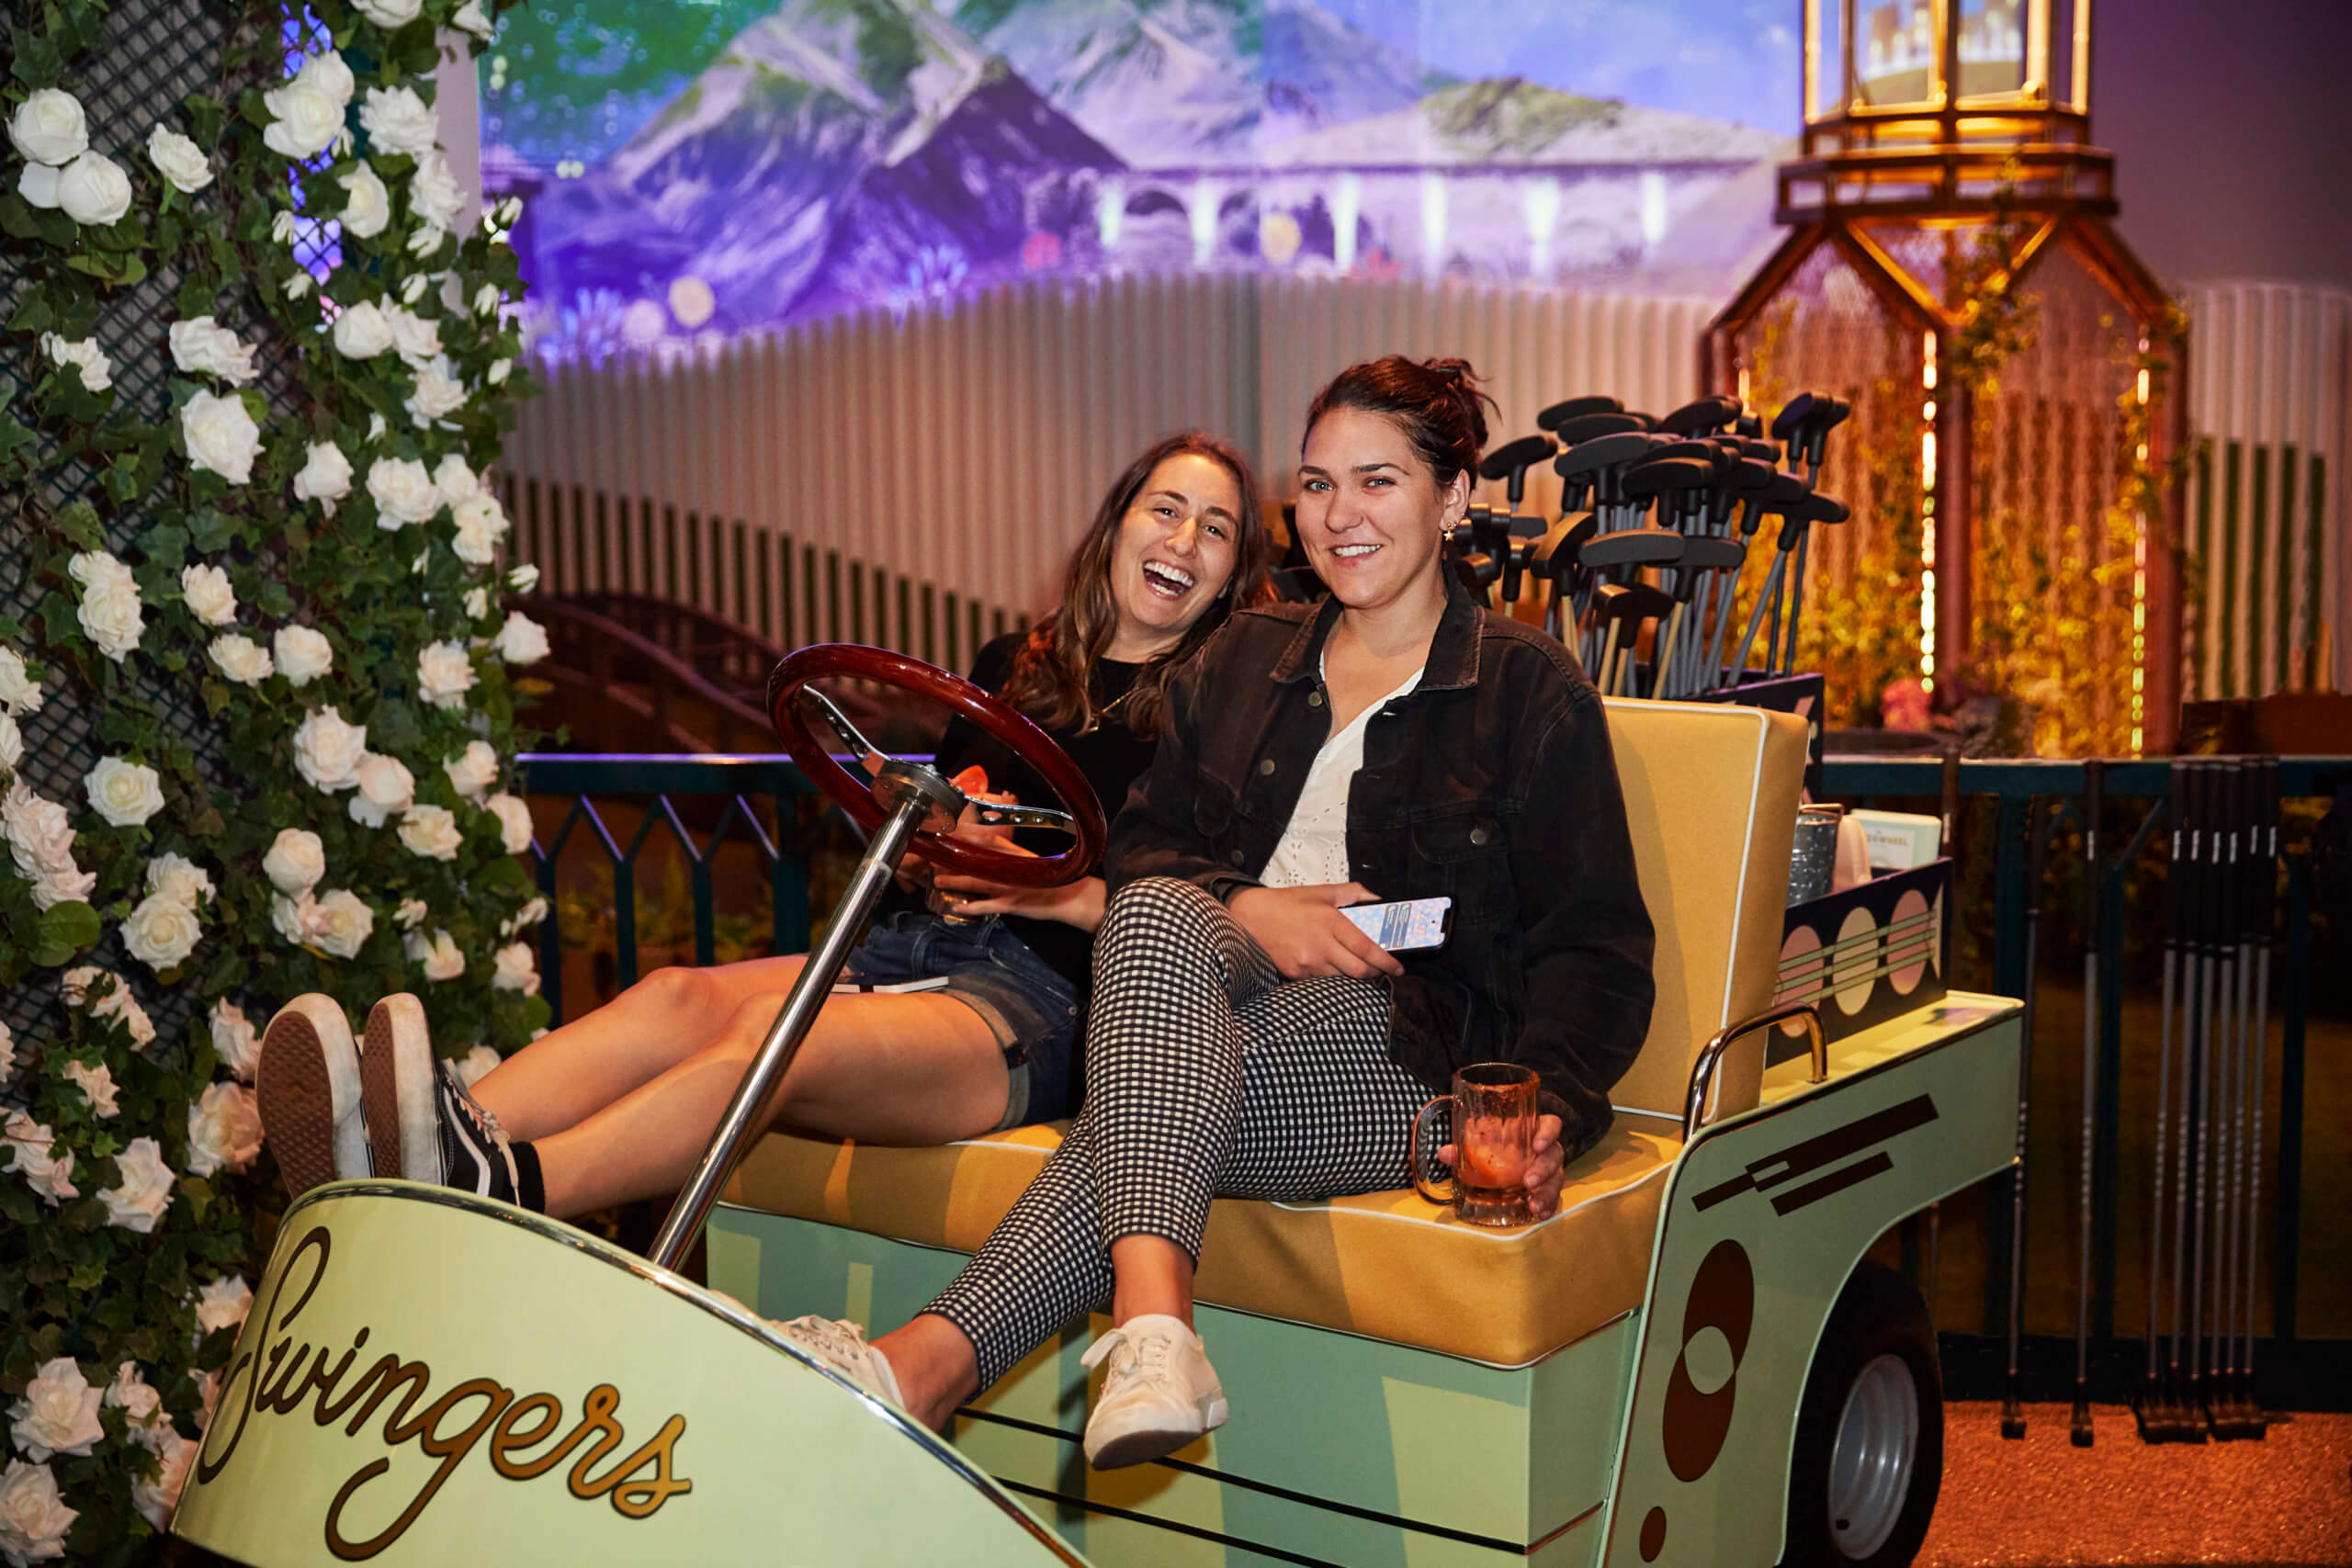 Swingers brings immersive mini golf experience to New York City with local fare and drinks amNewYork photo